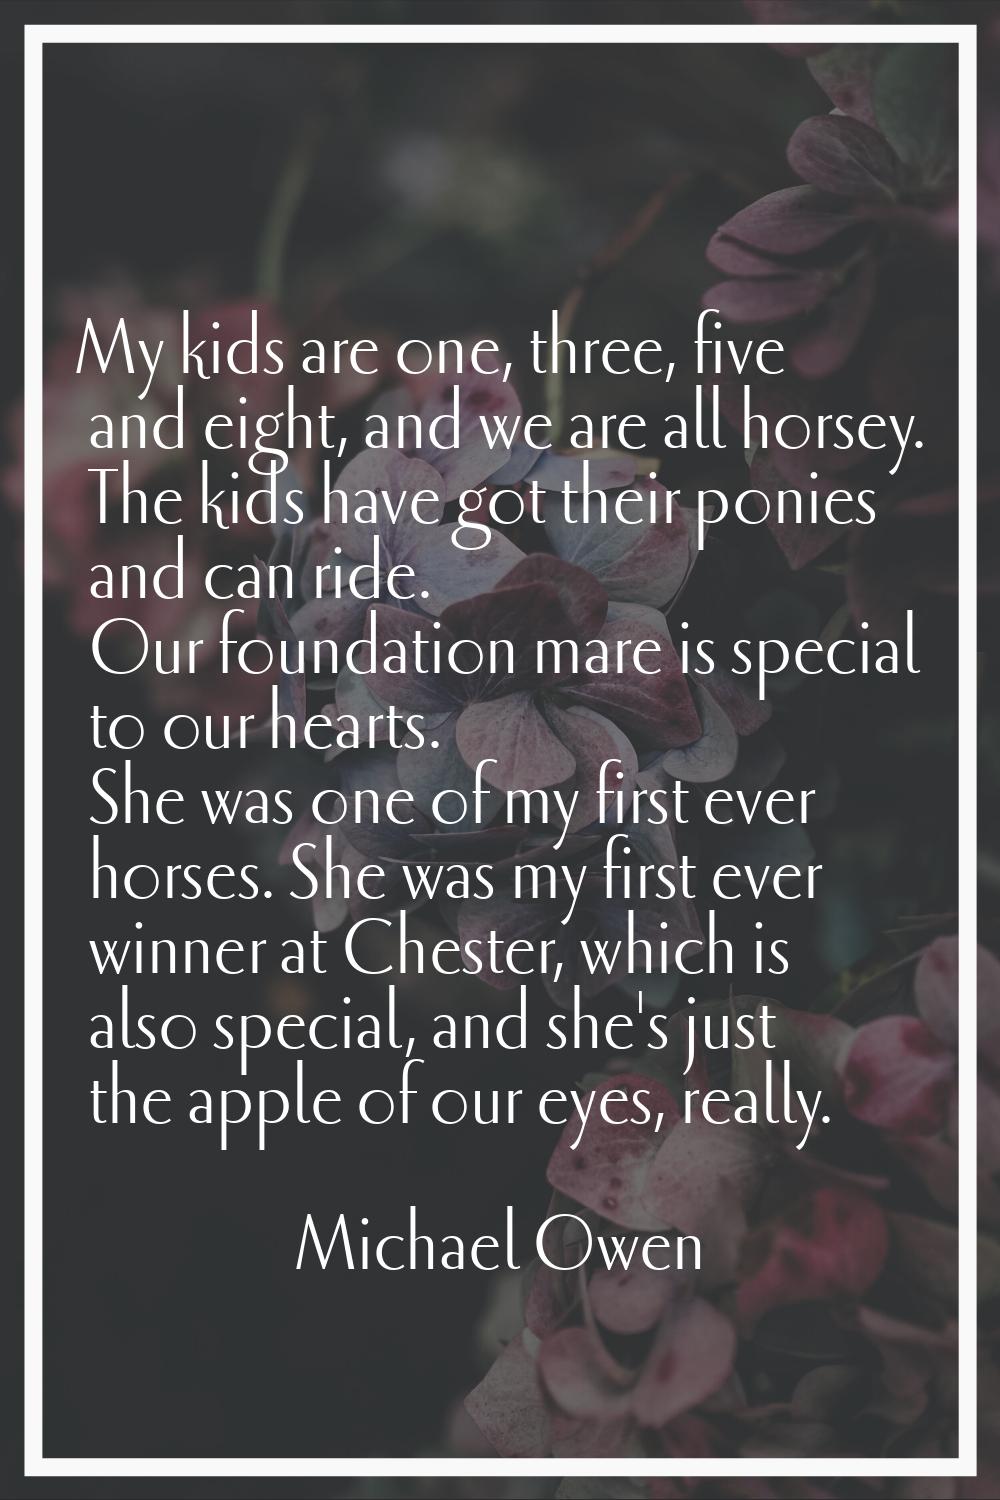 My kids are one, three, five and eight, and we are all horsey. The kids have got their ponies and c